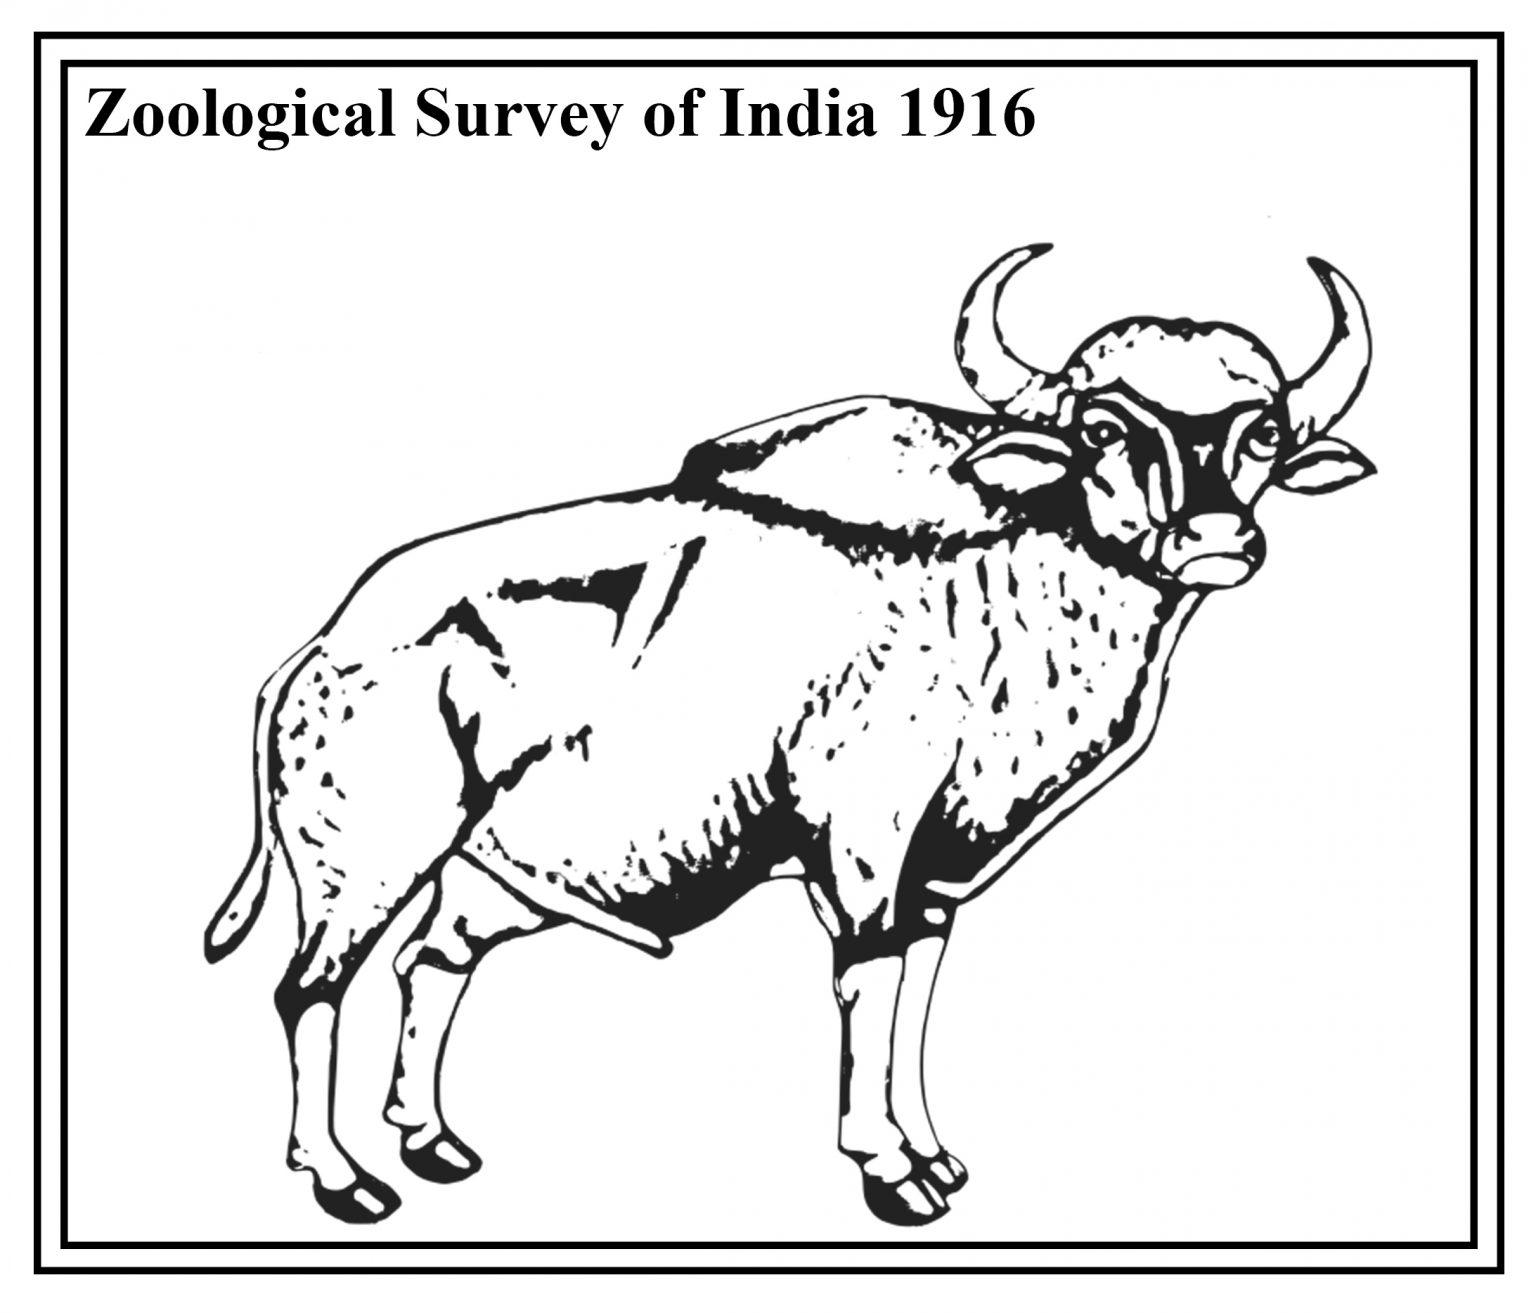 Zoological Survey of India gets 1st female director in 100 years